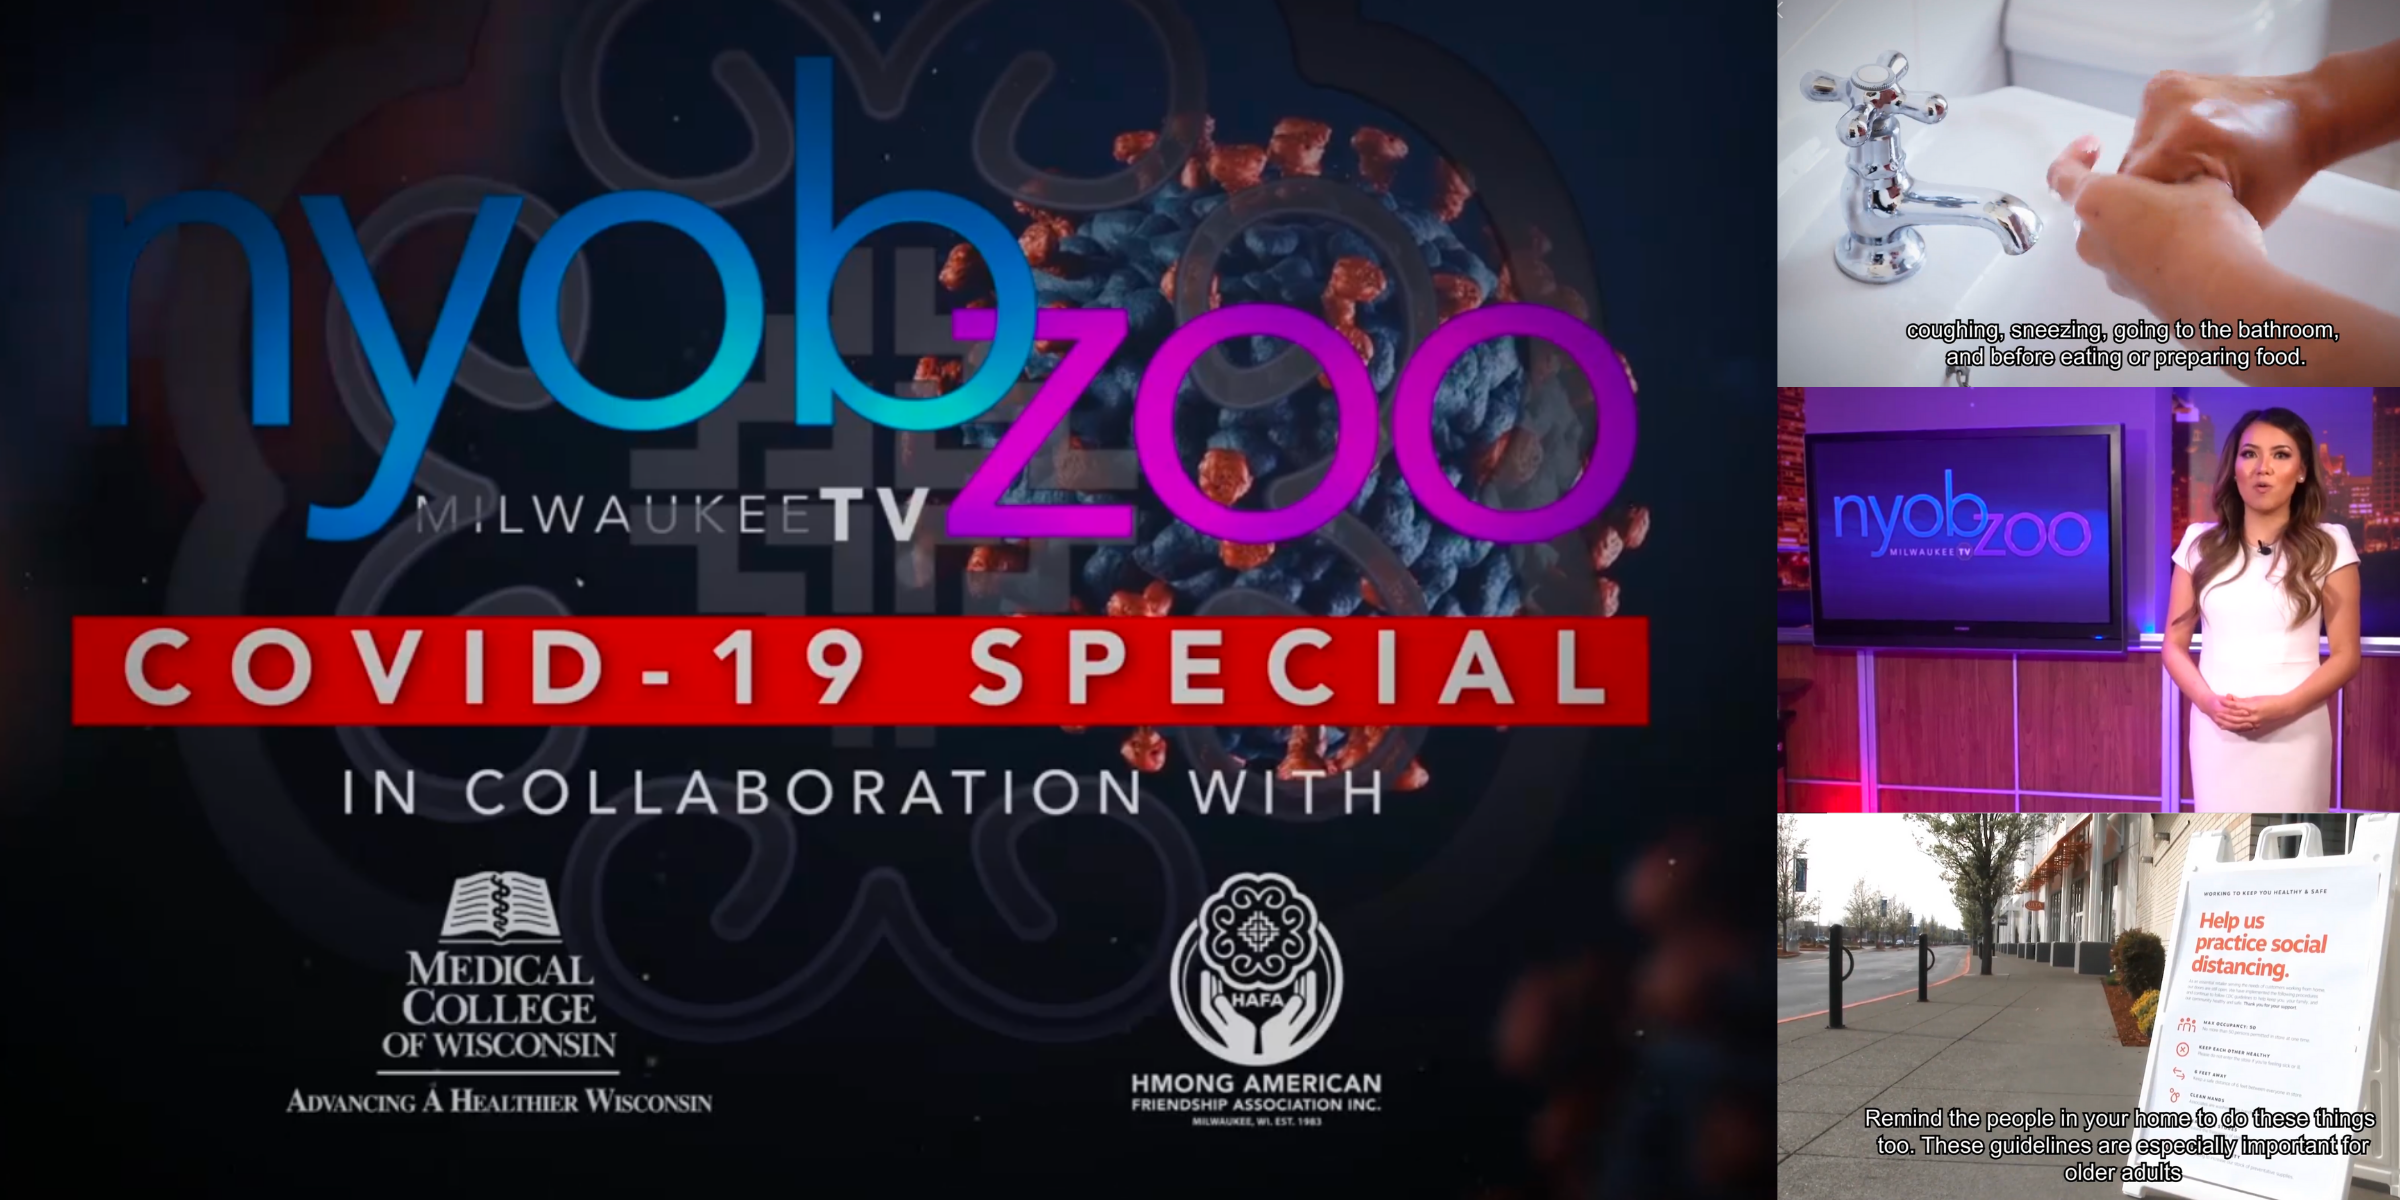 Picture of Nyob Zoo Milwaukee TV COVID19 Special Program